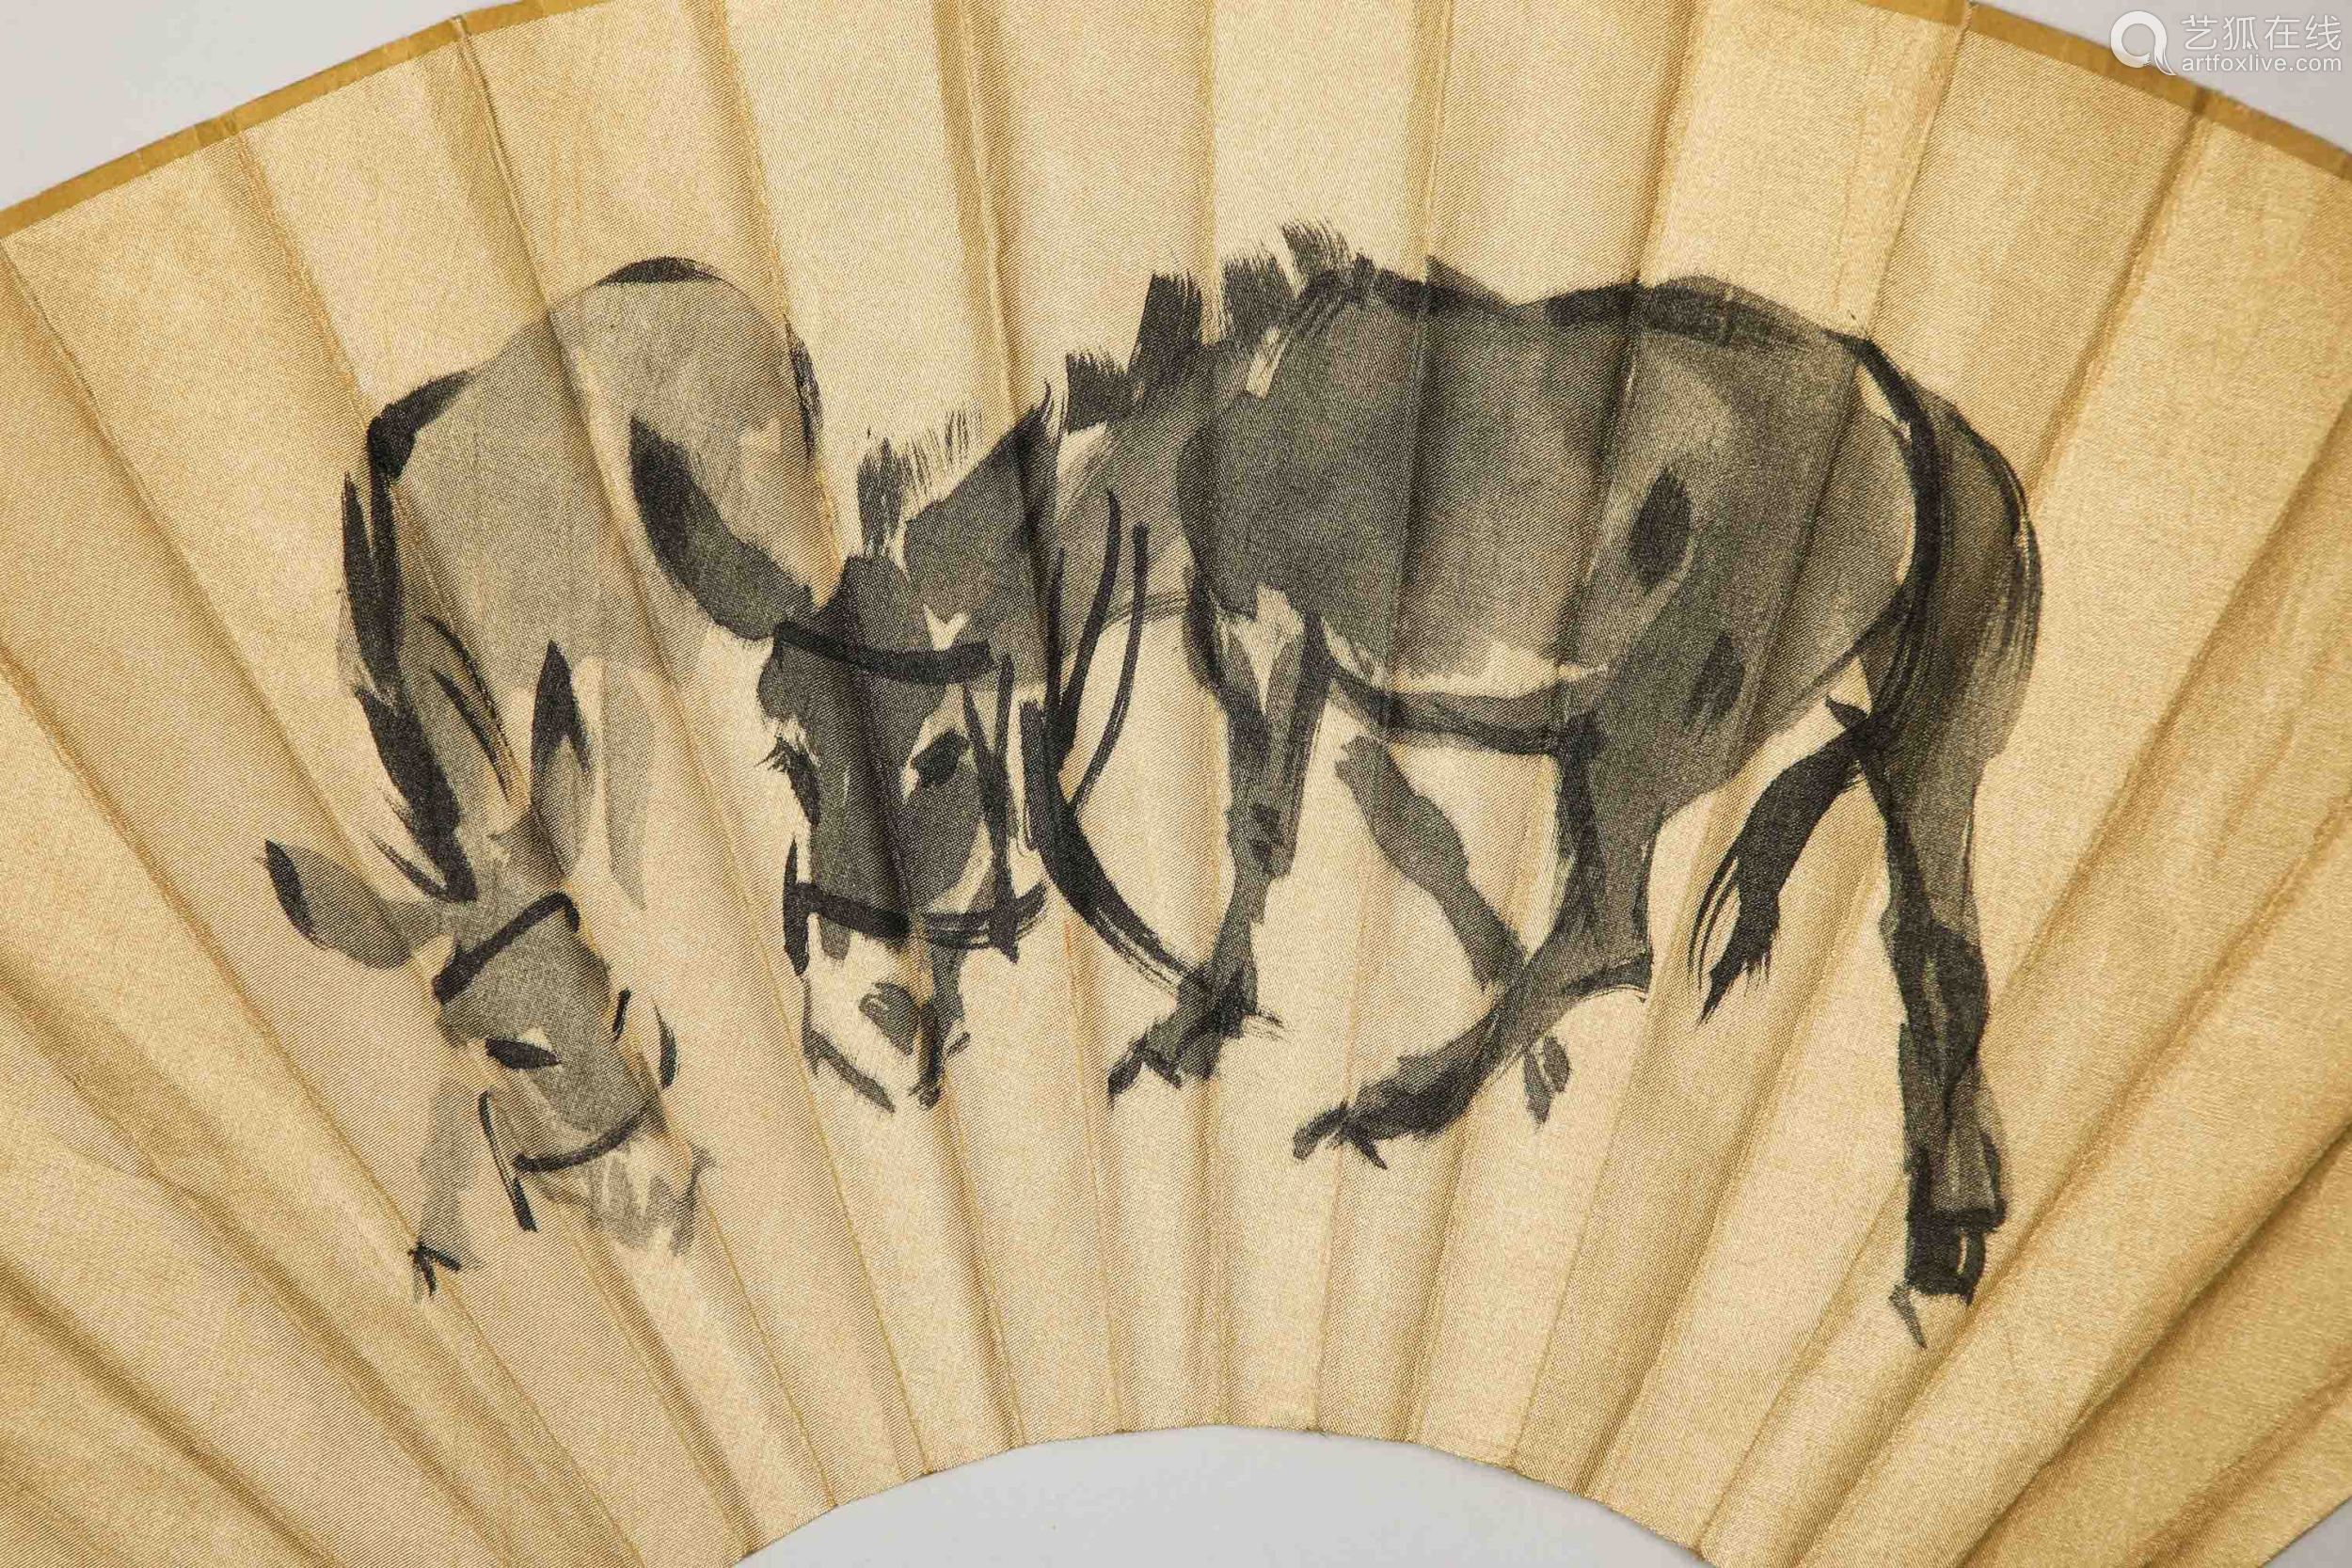 Chinese ink painting, 
Huang Zhou's donkey painting